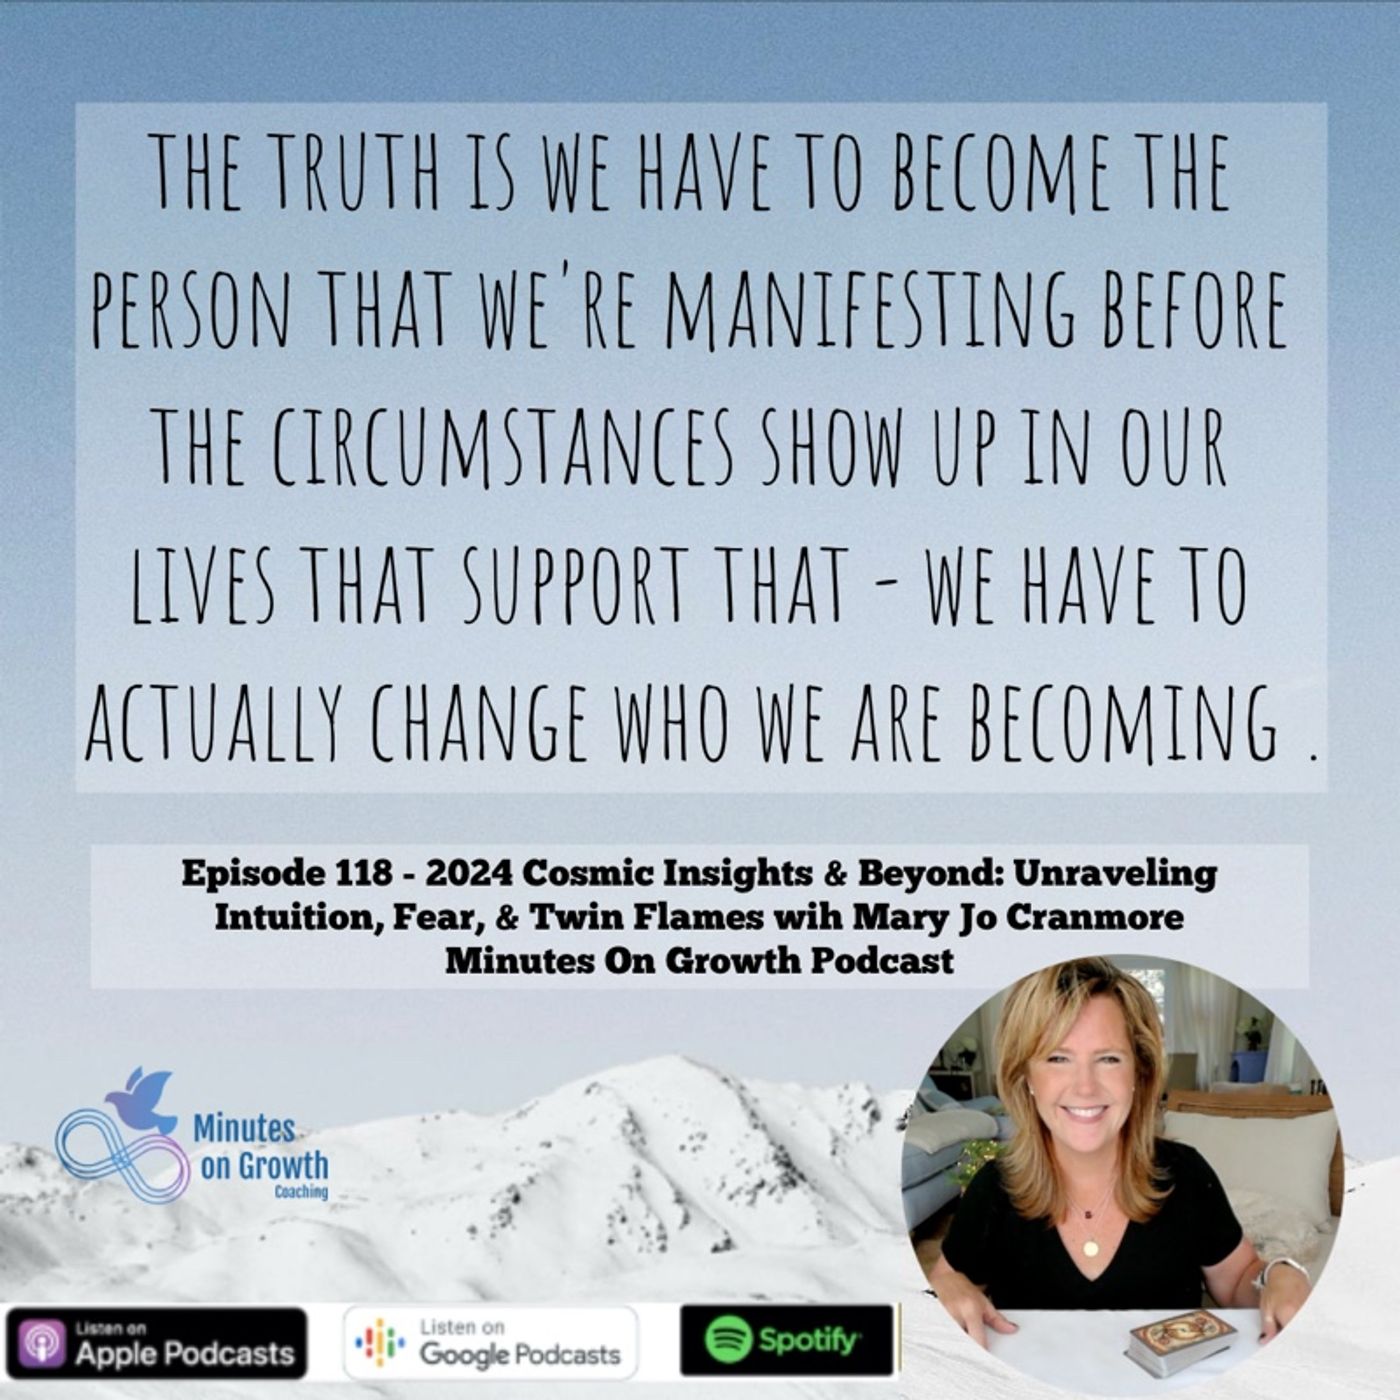 Episode 118: 2024 Cosmic Insights & Beyond - Unraveling Intuition, Fear & Twin Flames with Mary Jo Cranmore